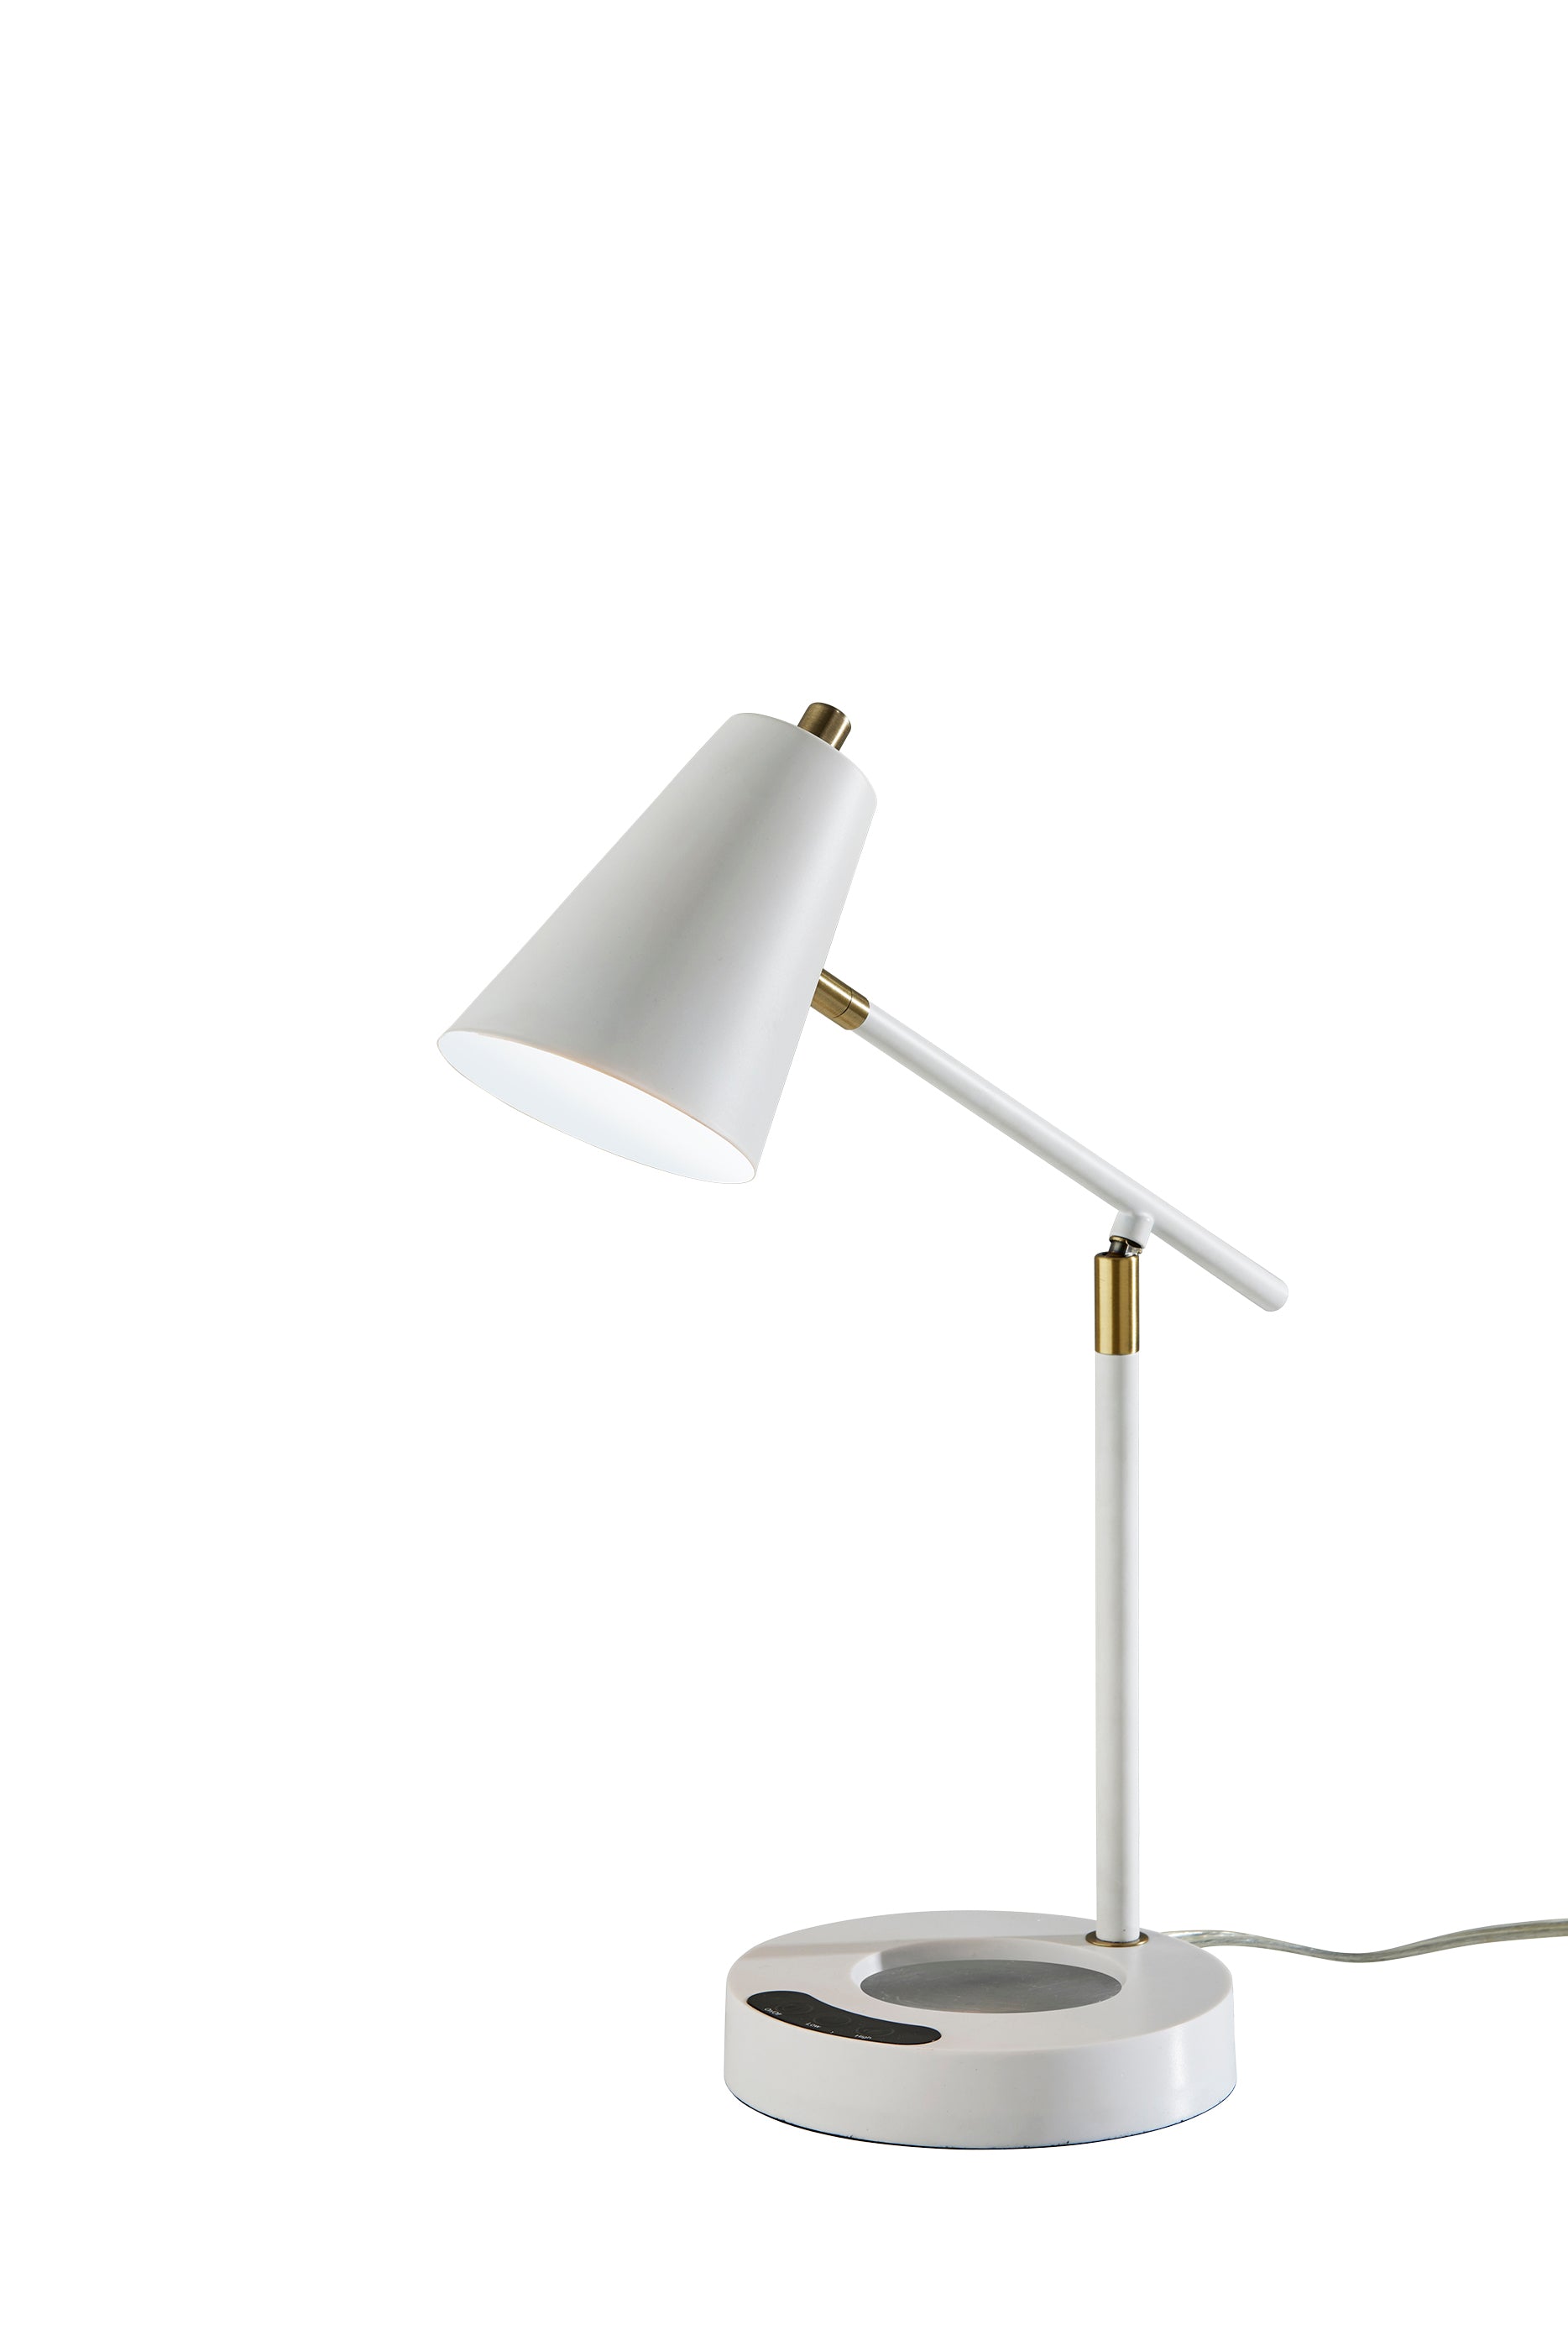 CUP WARMING Table lamp White - SL3729-02 | ADESSO